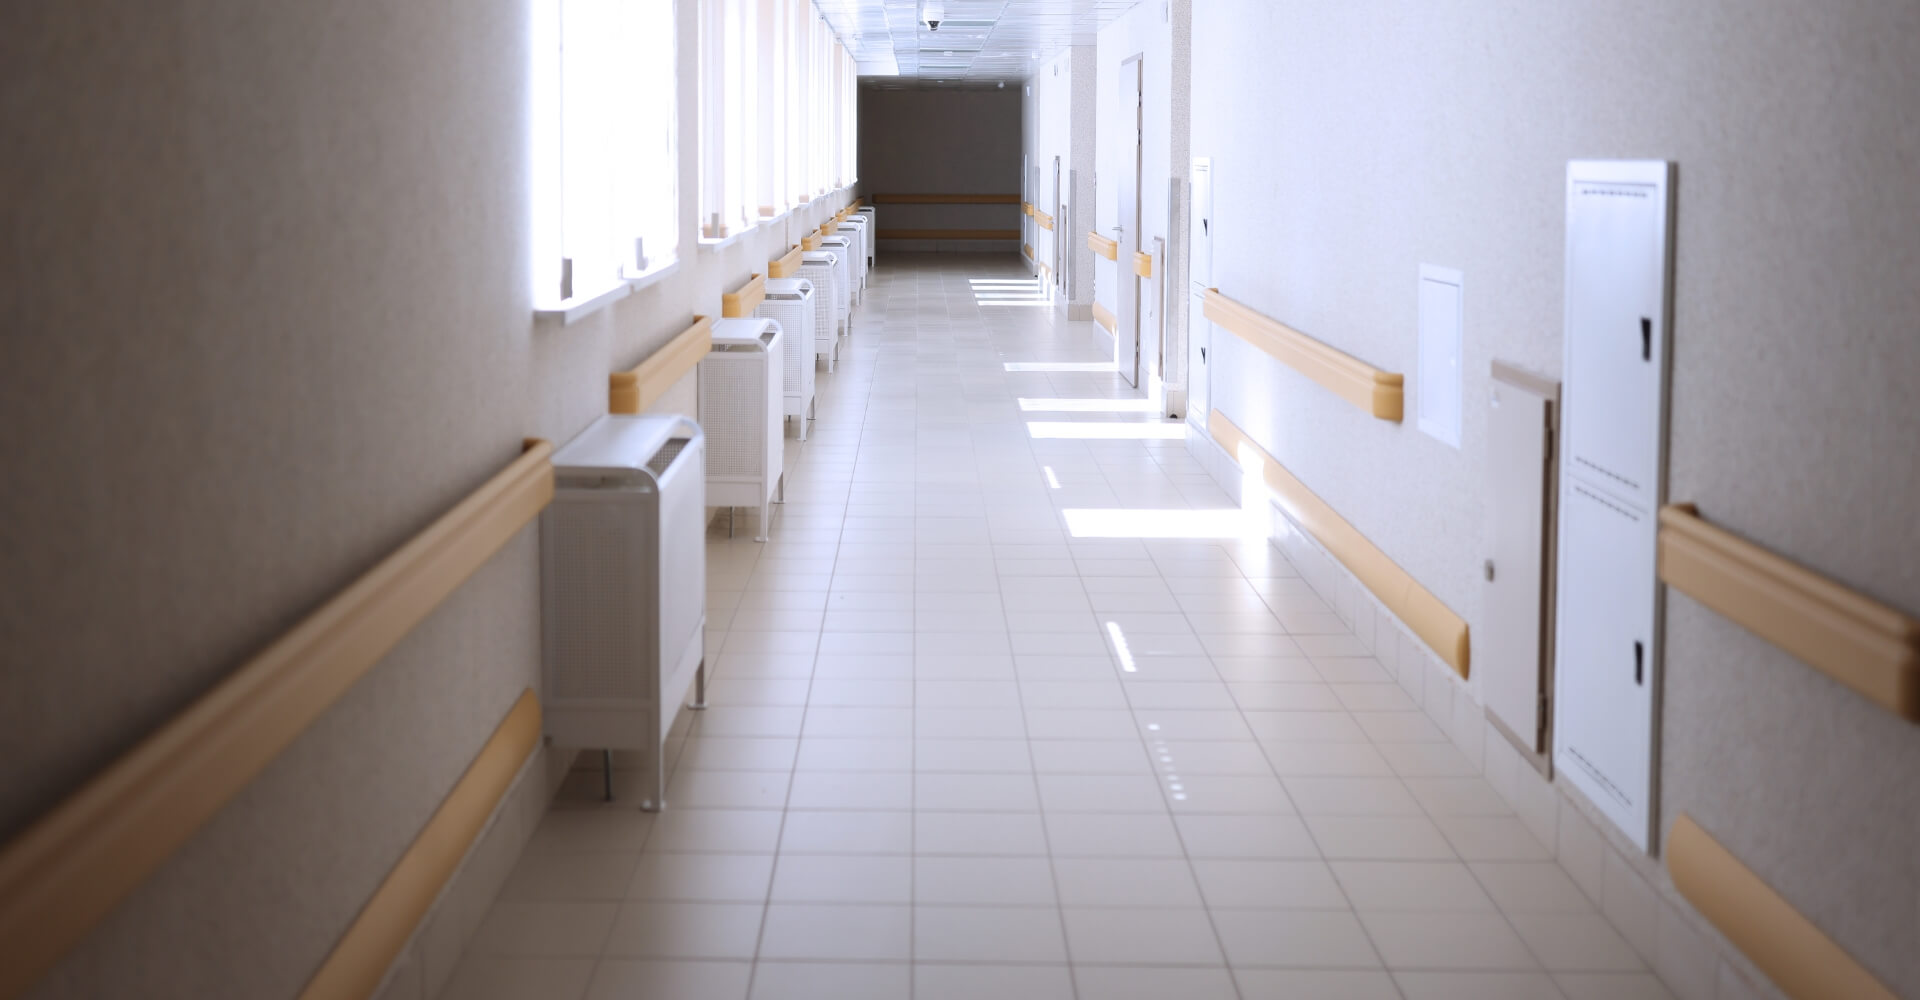 How to Create a Customized Healthcare Cleaning Plan for Your Medical Facility